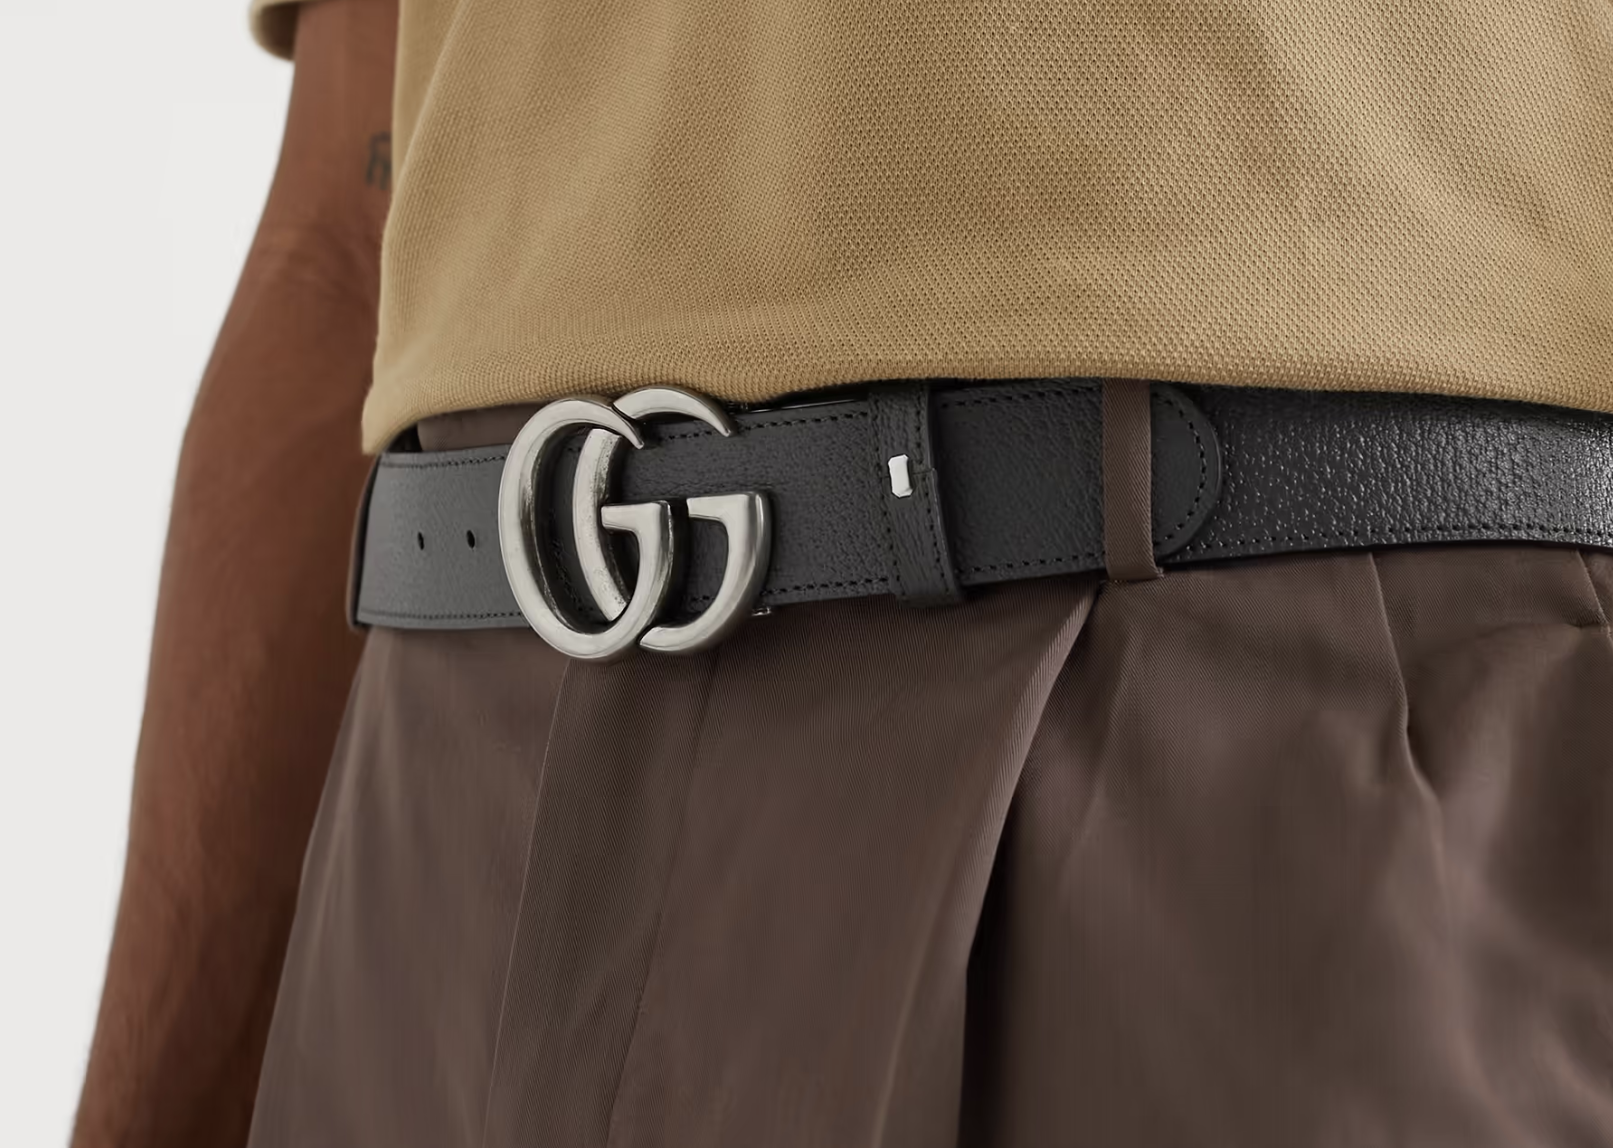 Gucci, Burberry, and Ferragamo belts are up to 37% off today - The Manual